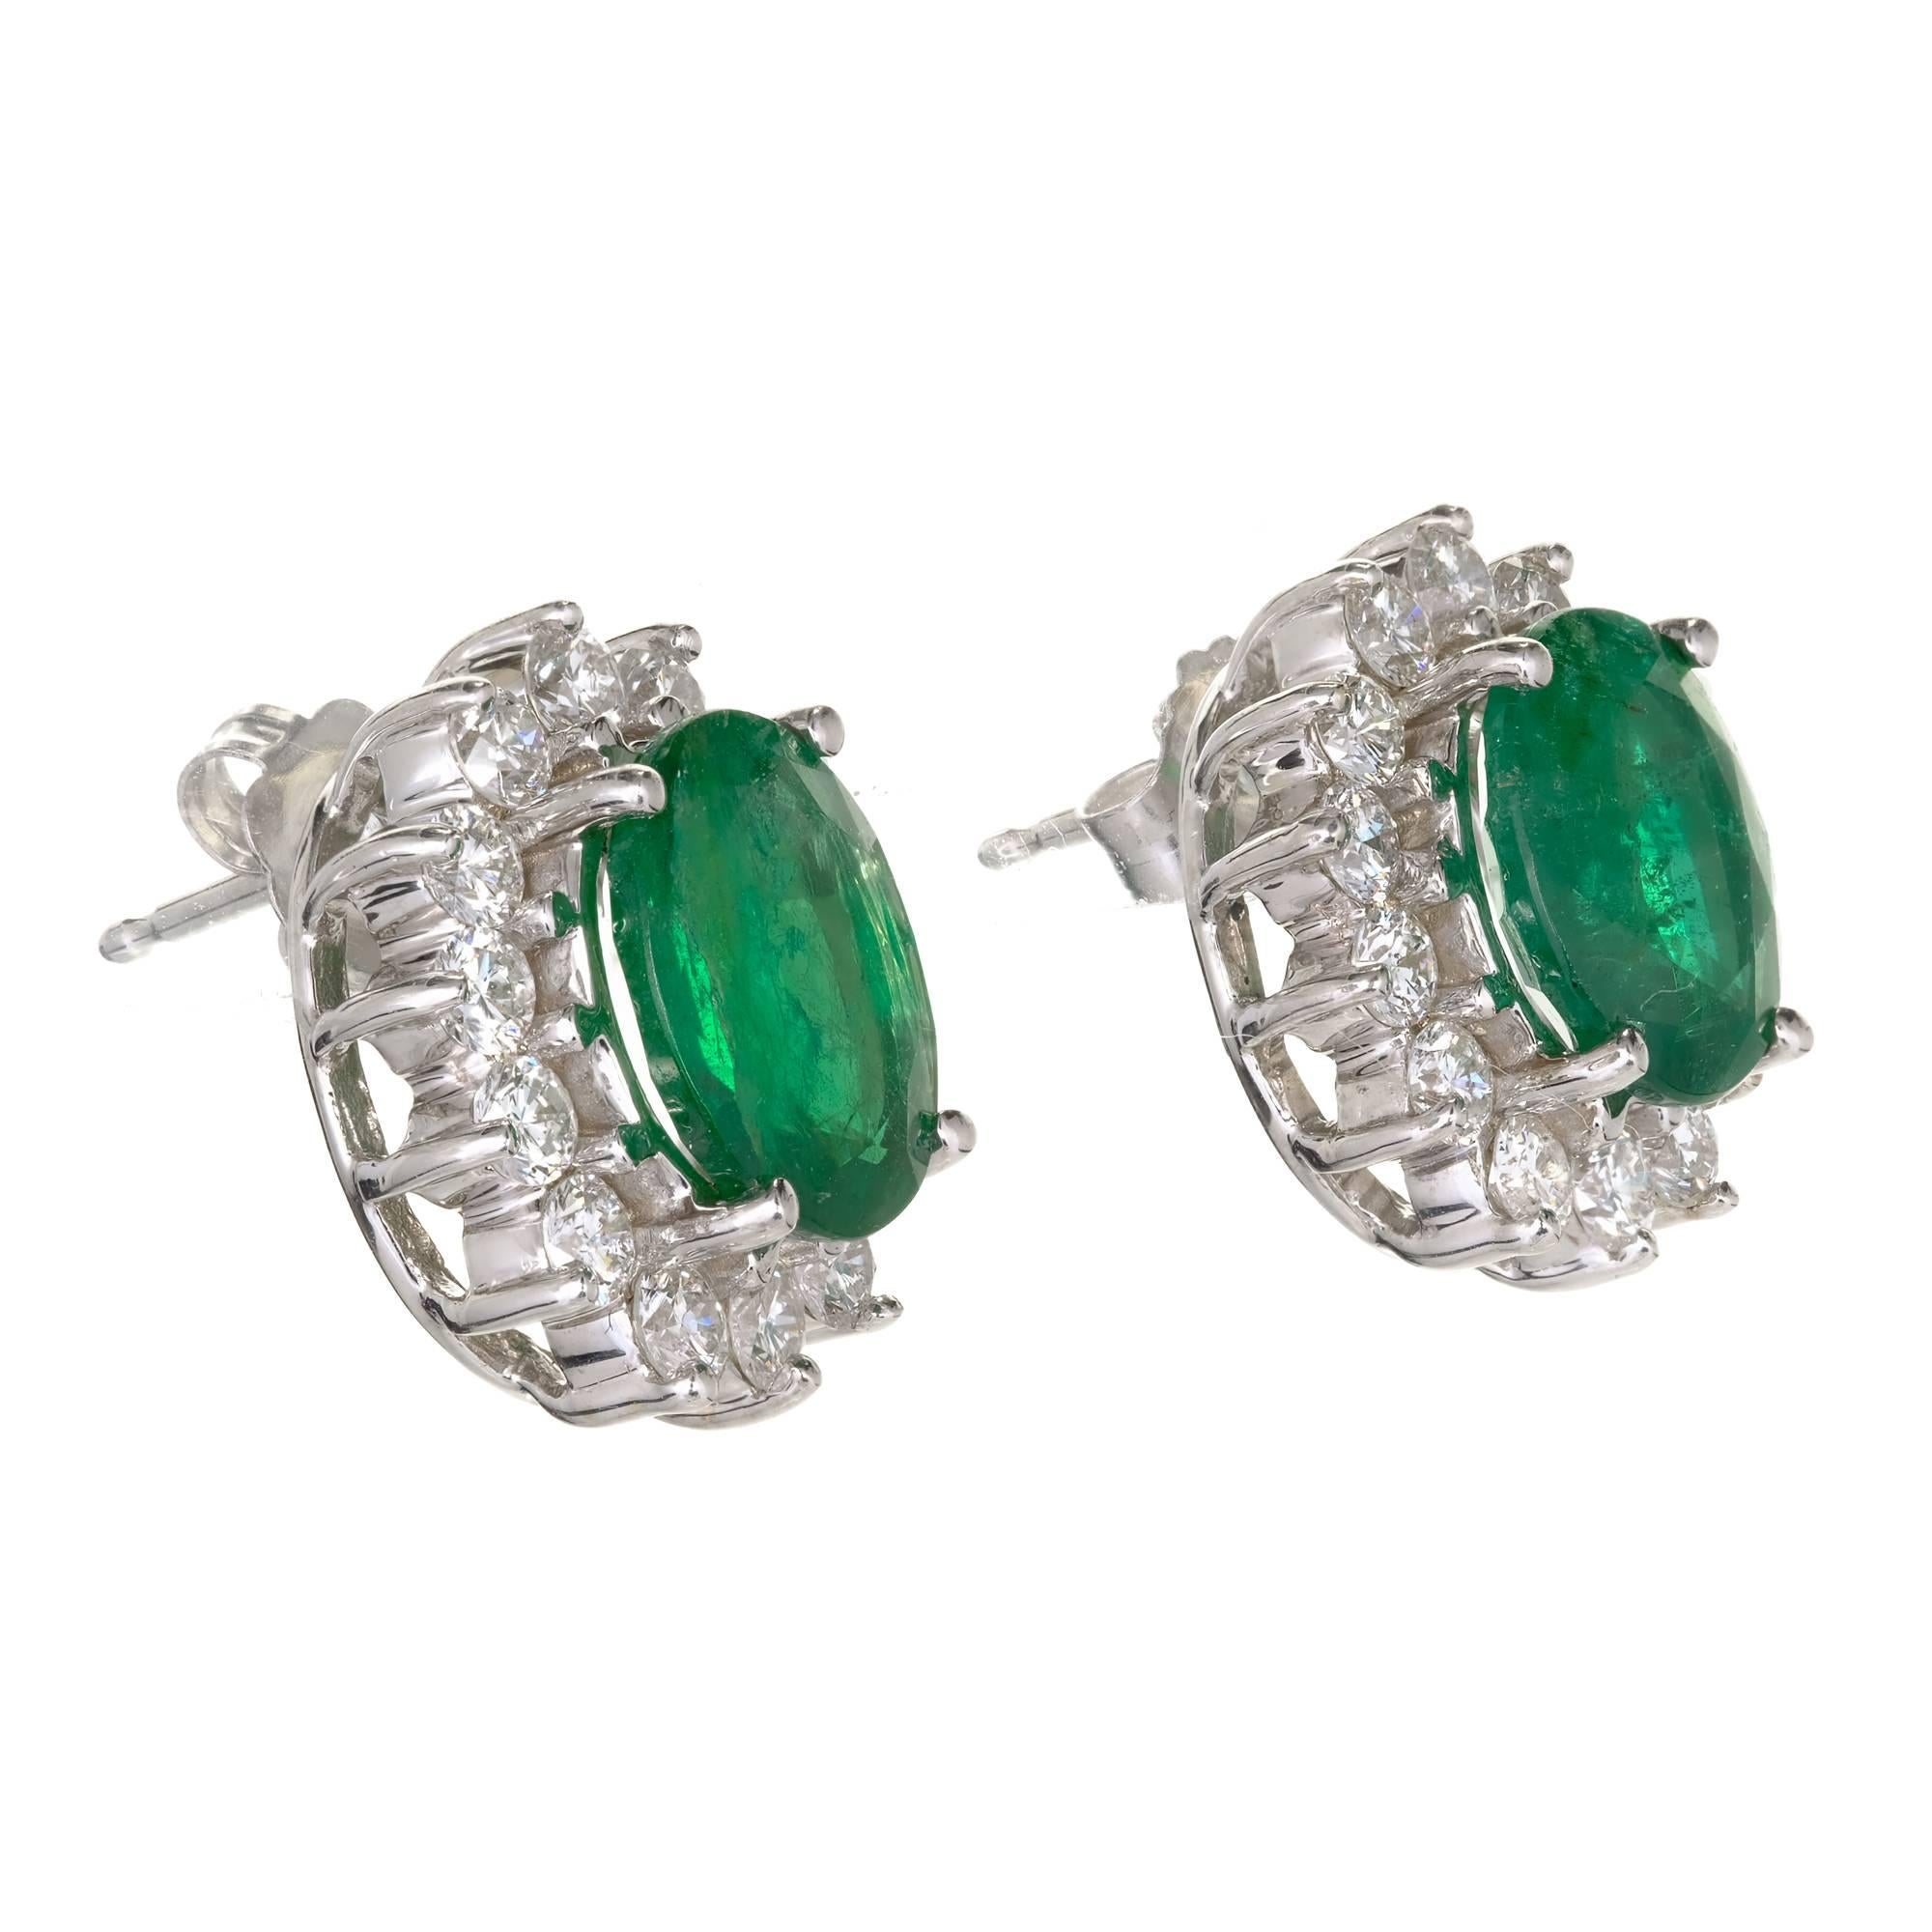 Emerald and diamond halo in a classic oval earring 18k white gold settings. Emeralds are surrounded by a halo of bright white diamonds. Top enhanced gem bright green color Emeralds natural oval brilliant and step cut, one minor clarity enhanced, one